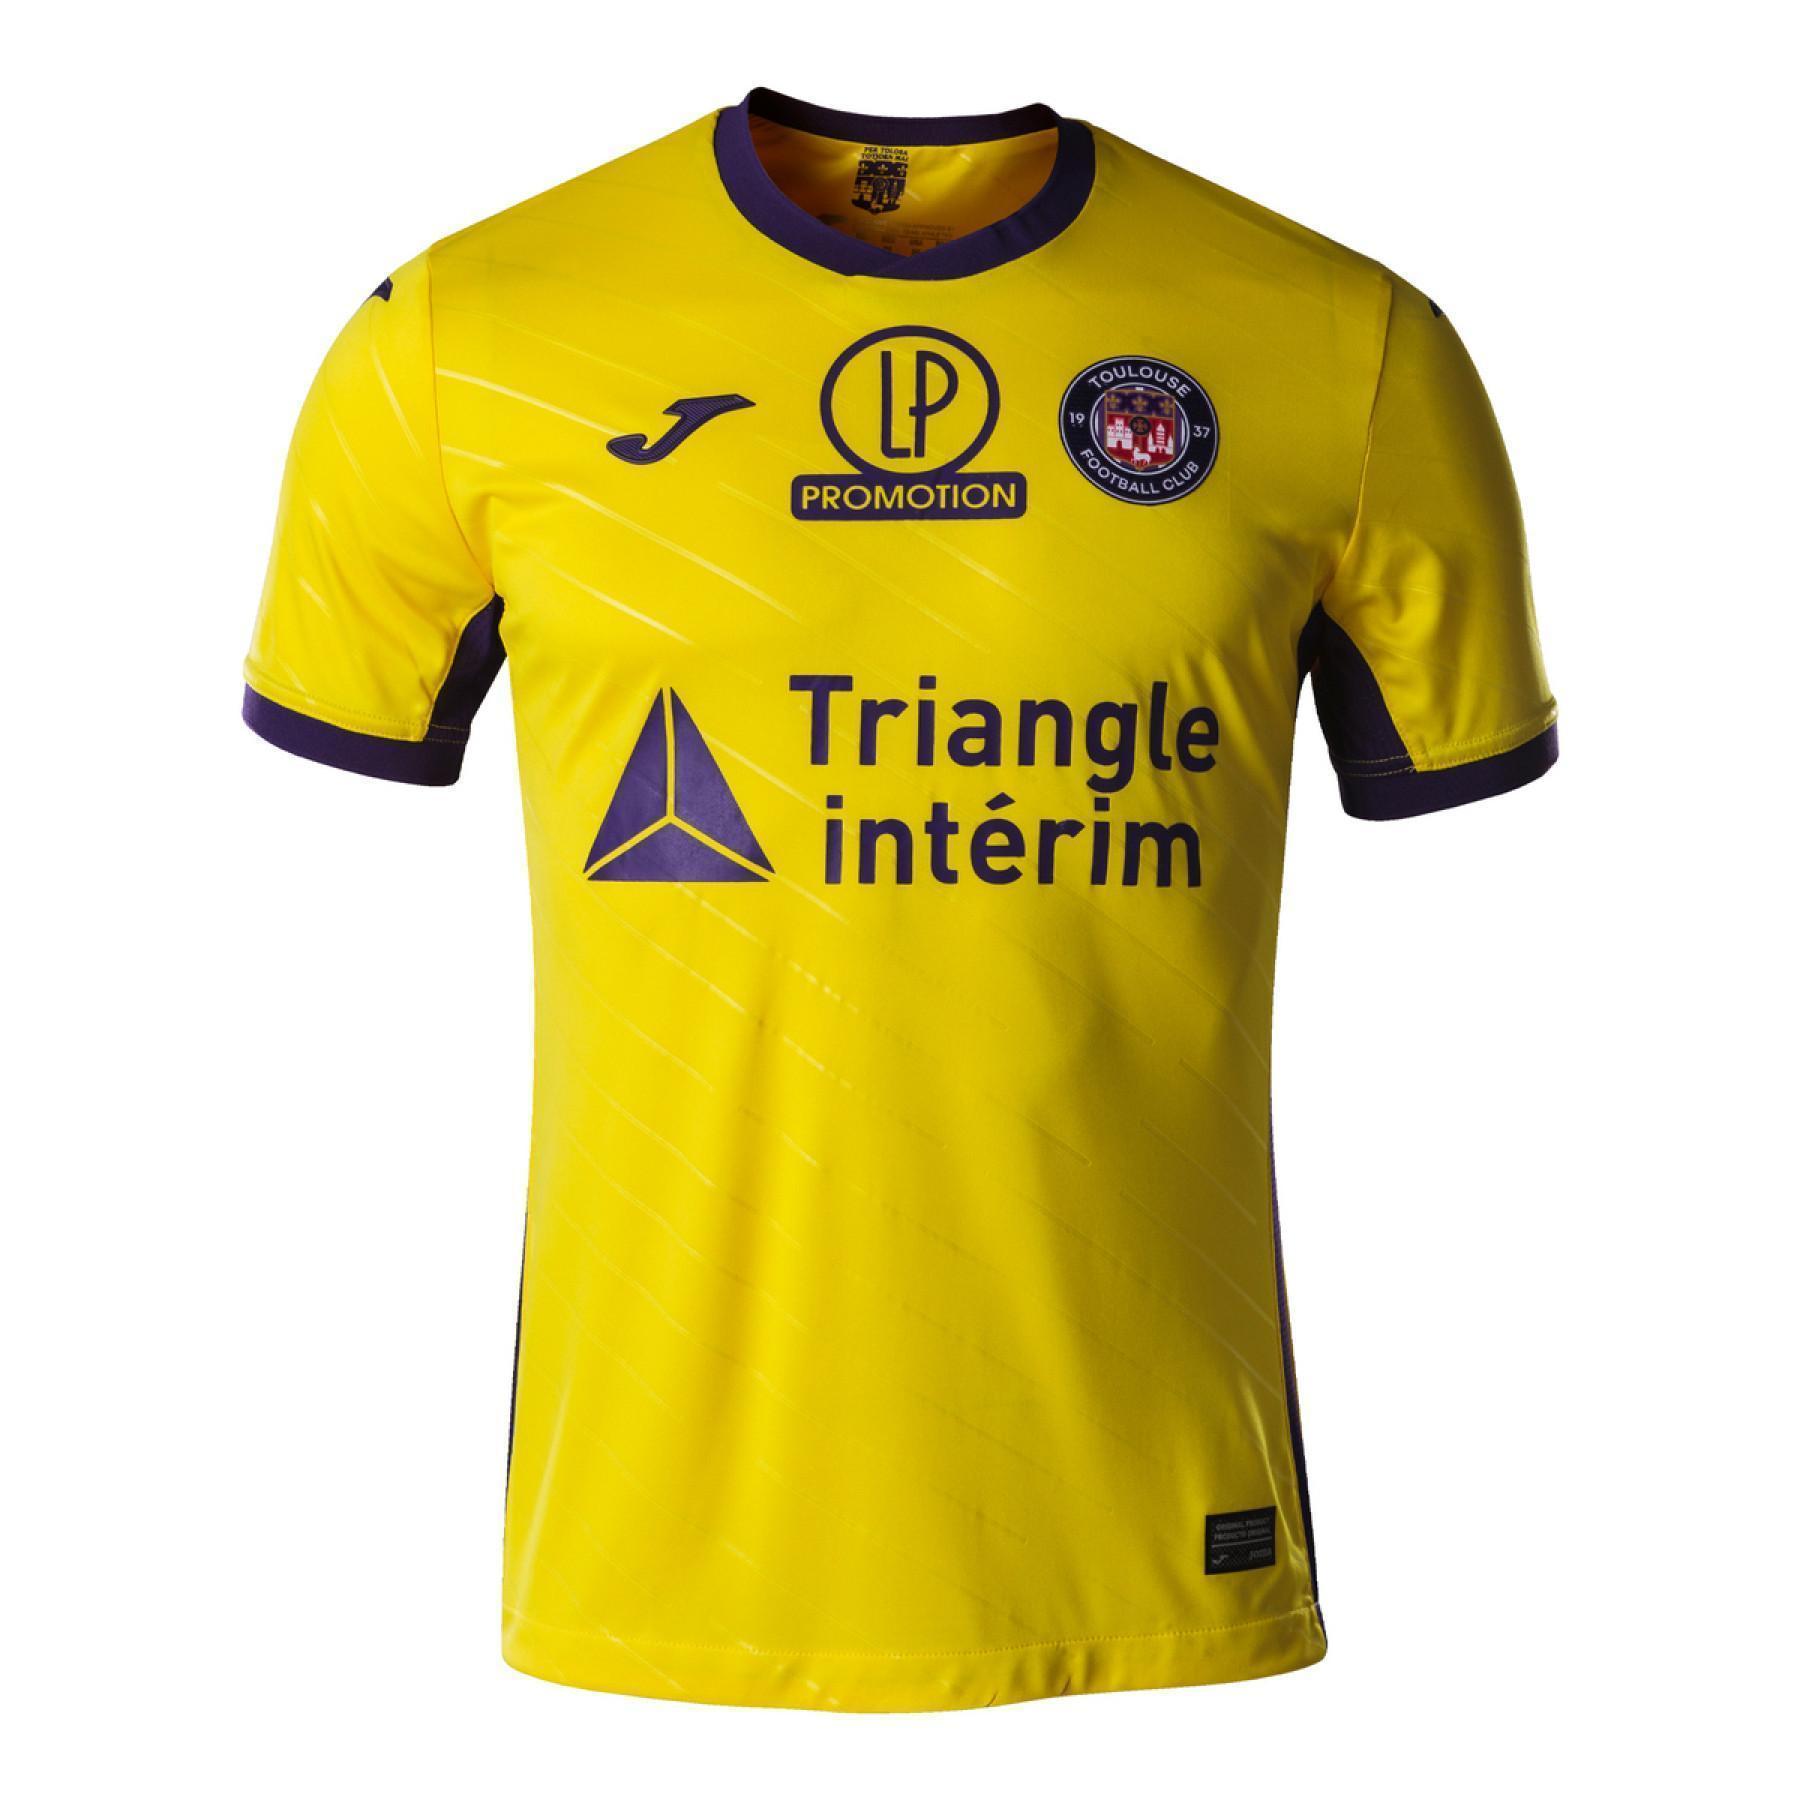 Children's outdoor jersey Toulouse FC 2020/21